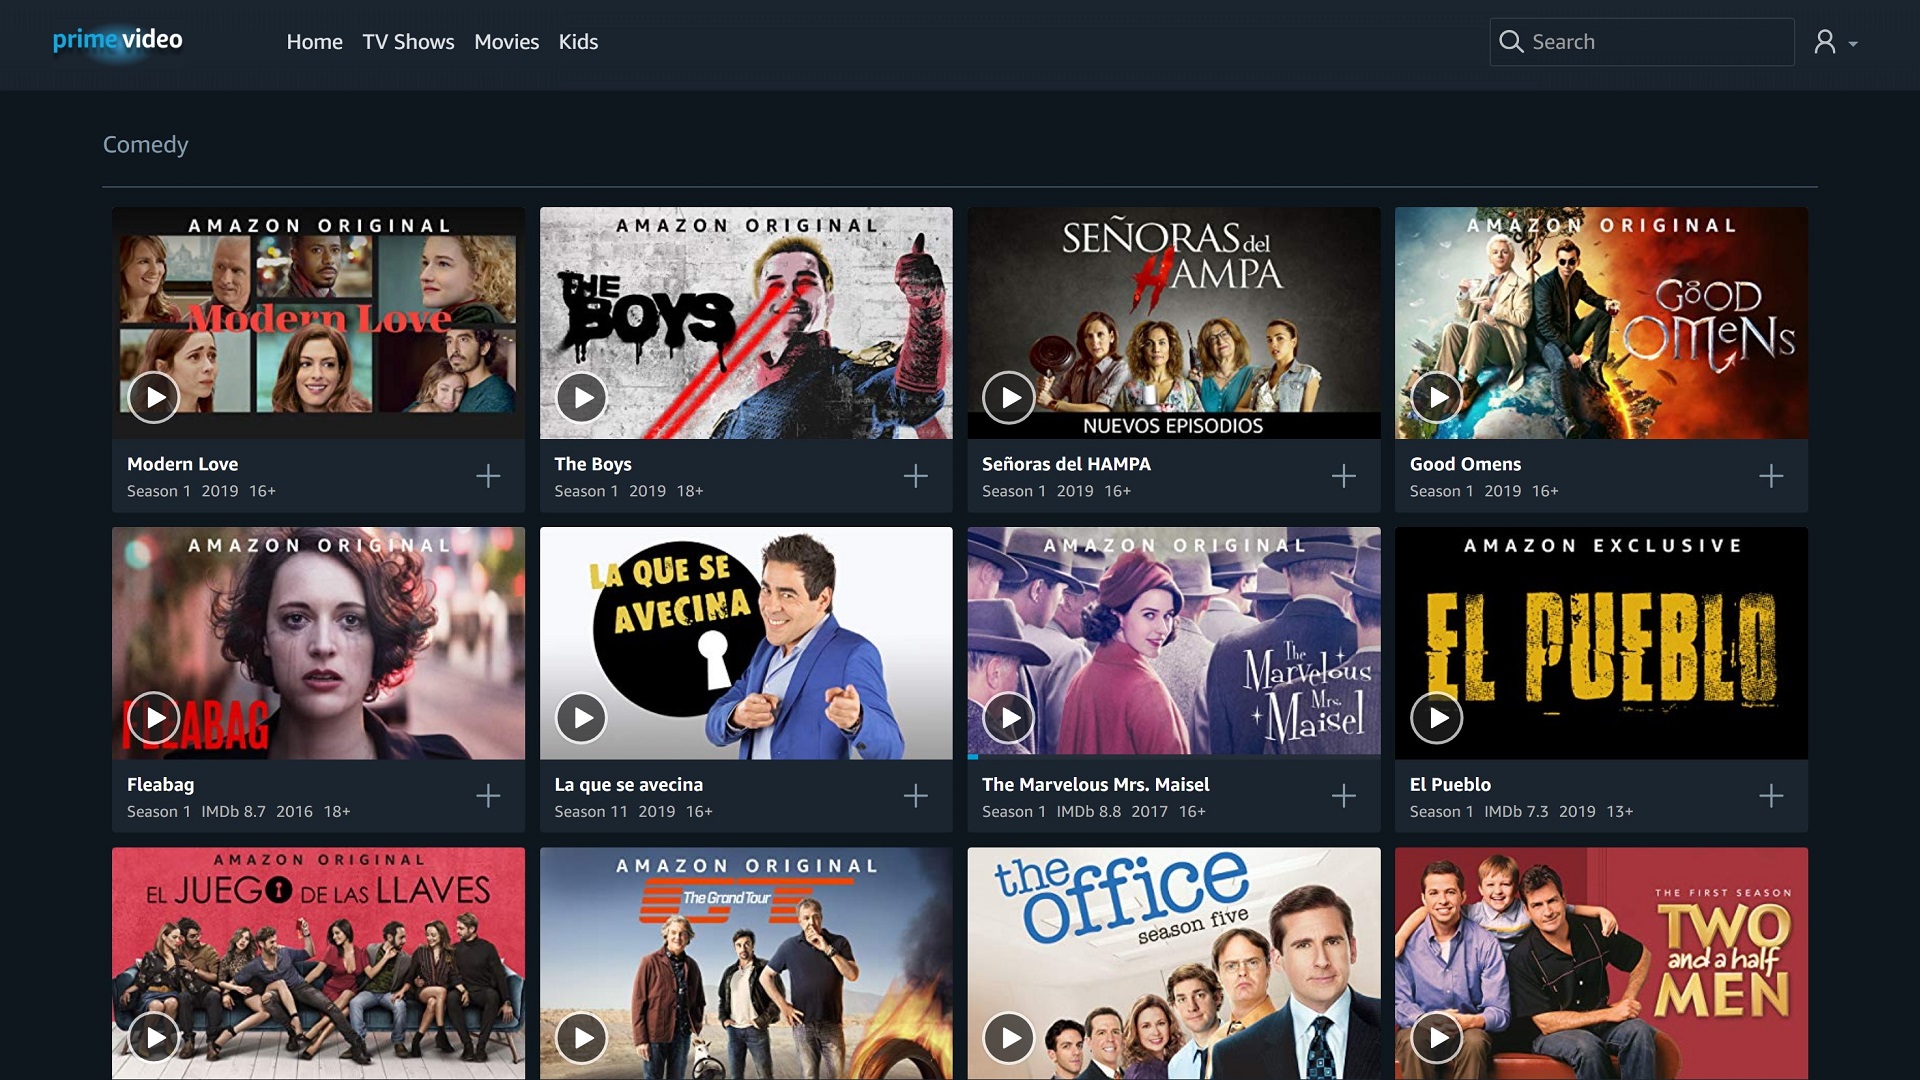 Best comedies on Amazon Prime Video featured